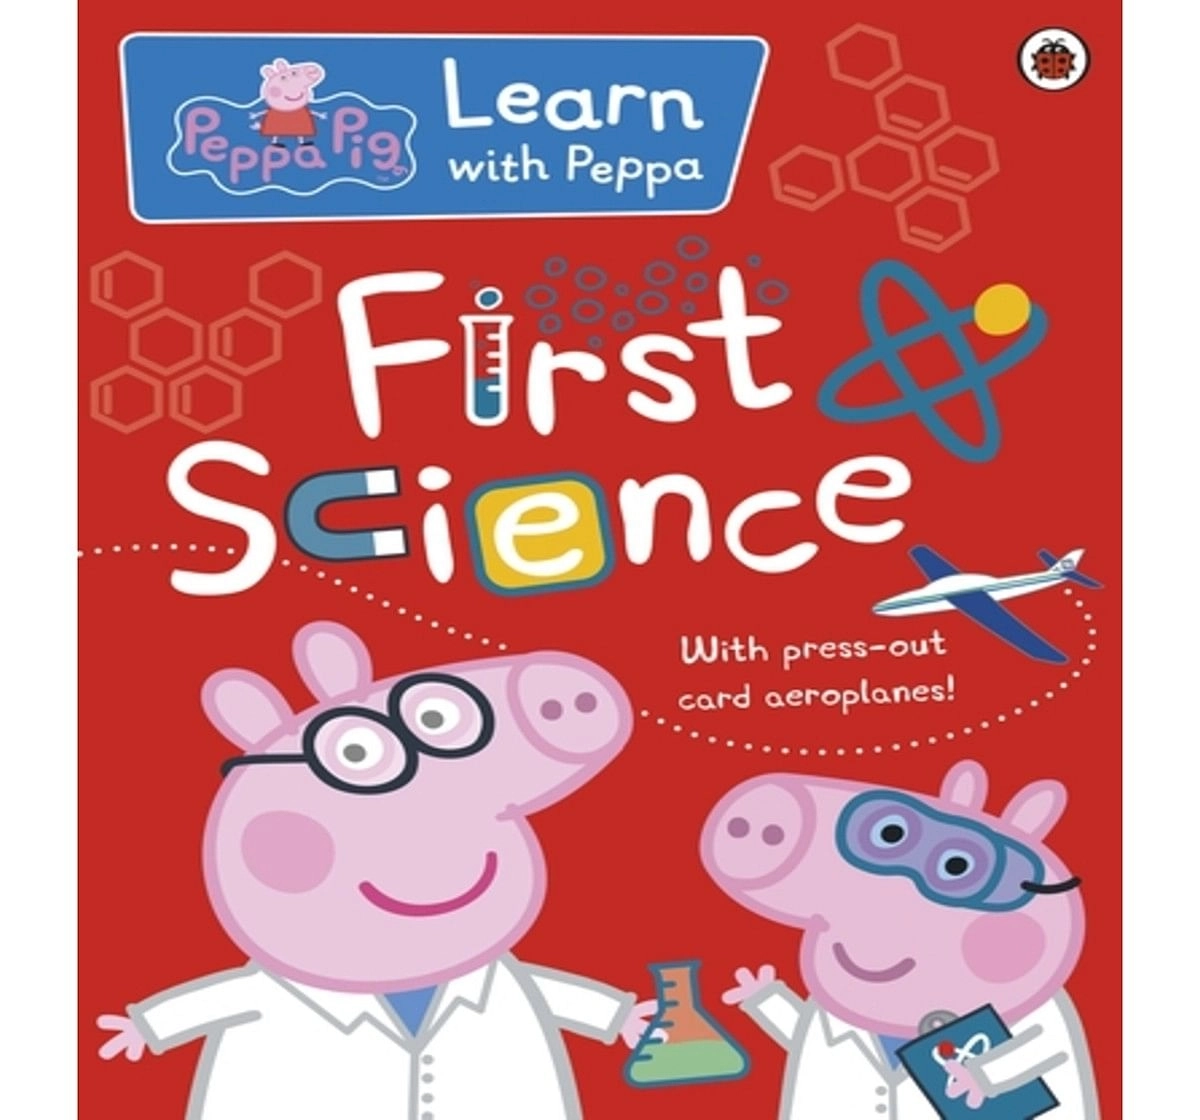 Peppa : First Science, 24 Pages Book by Ladybird, Paperback